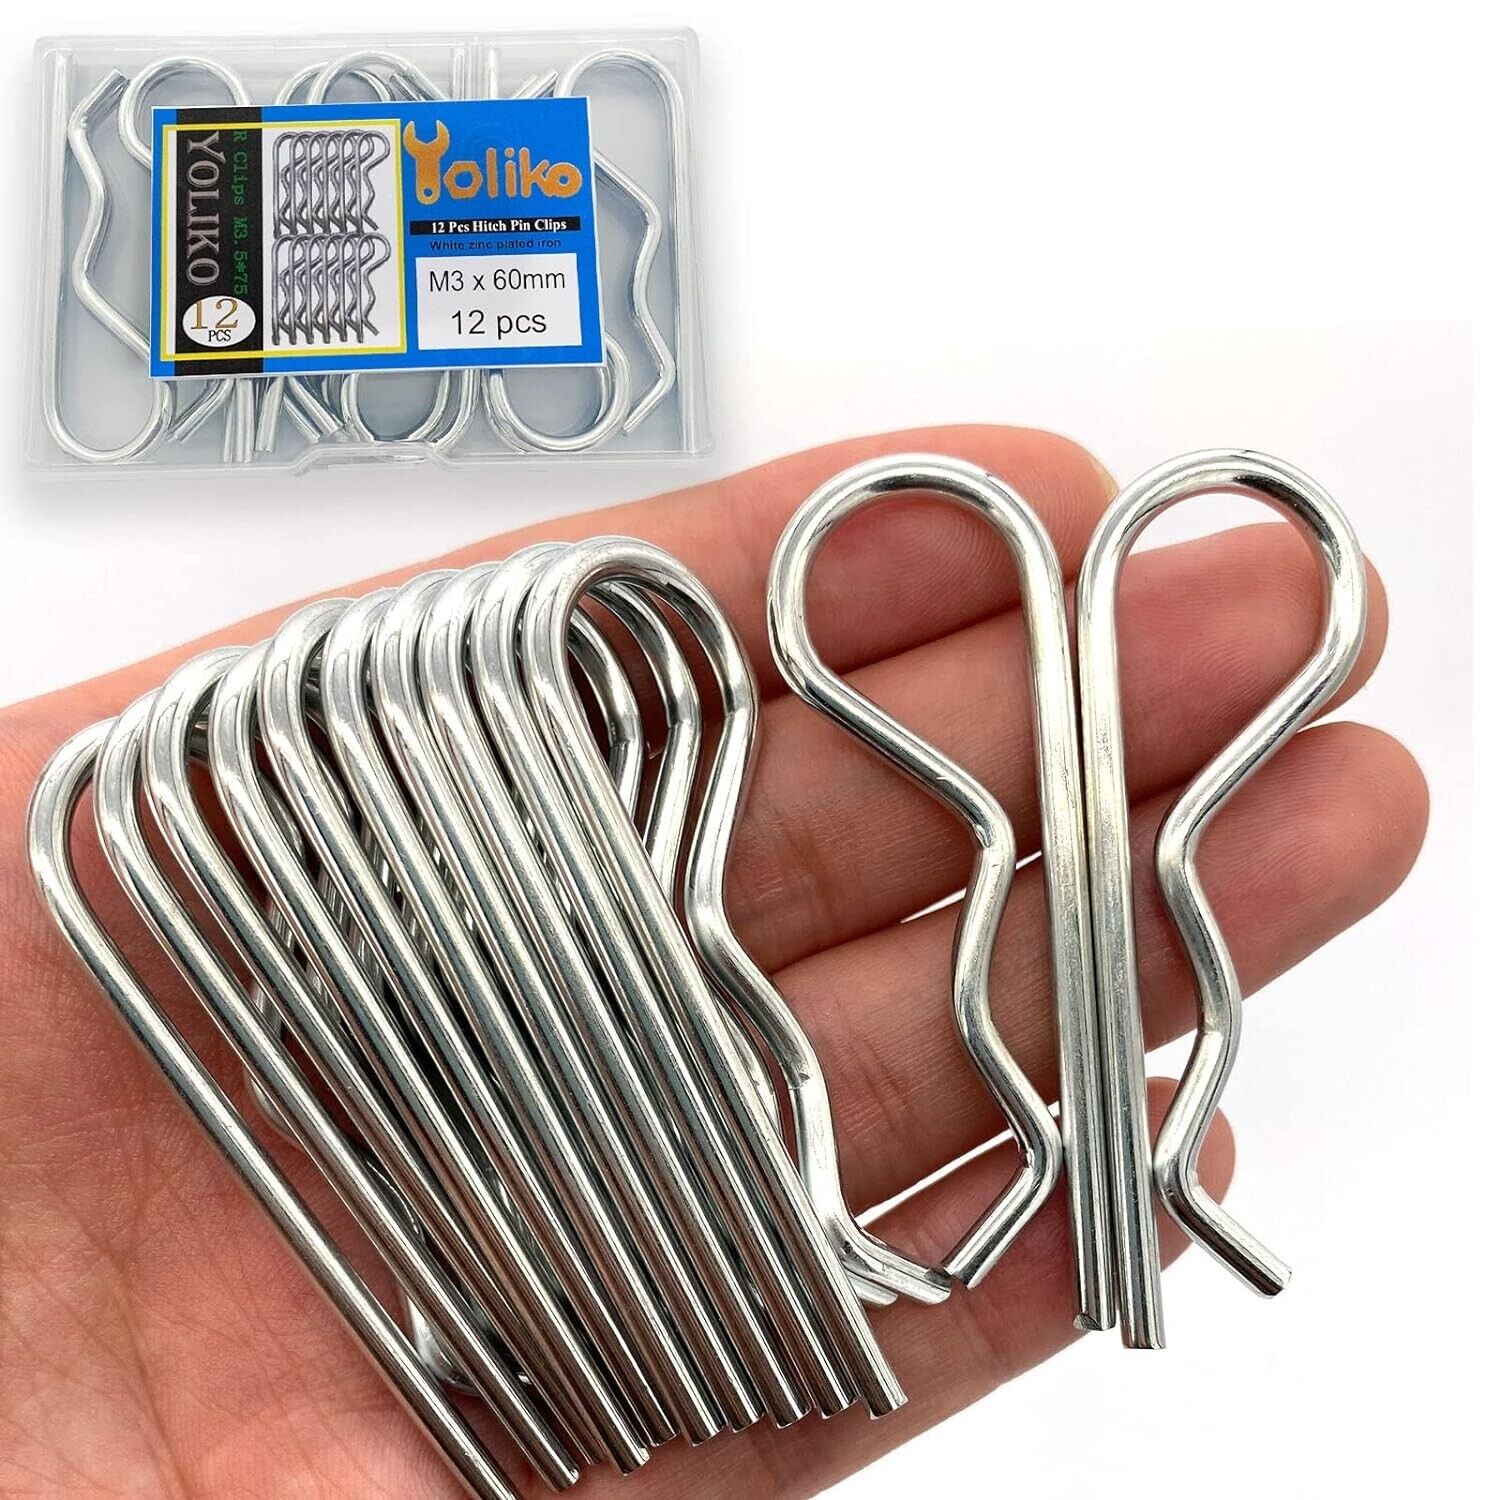 12 Pcs Heavy Duty Hitch Pins Clip R Clips Spring Retaining Wire Hair Pins